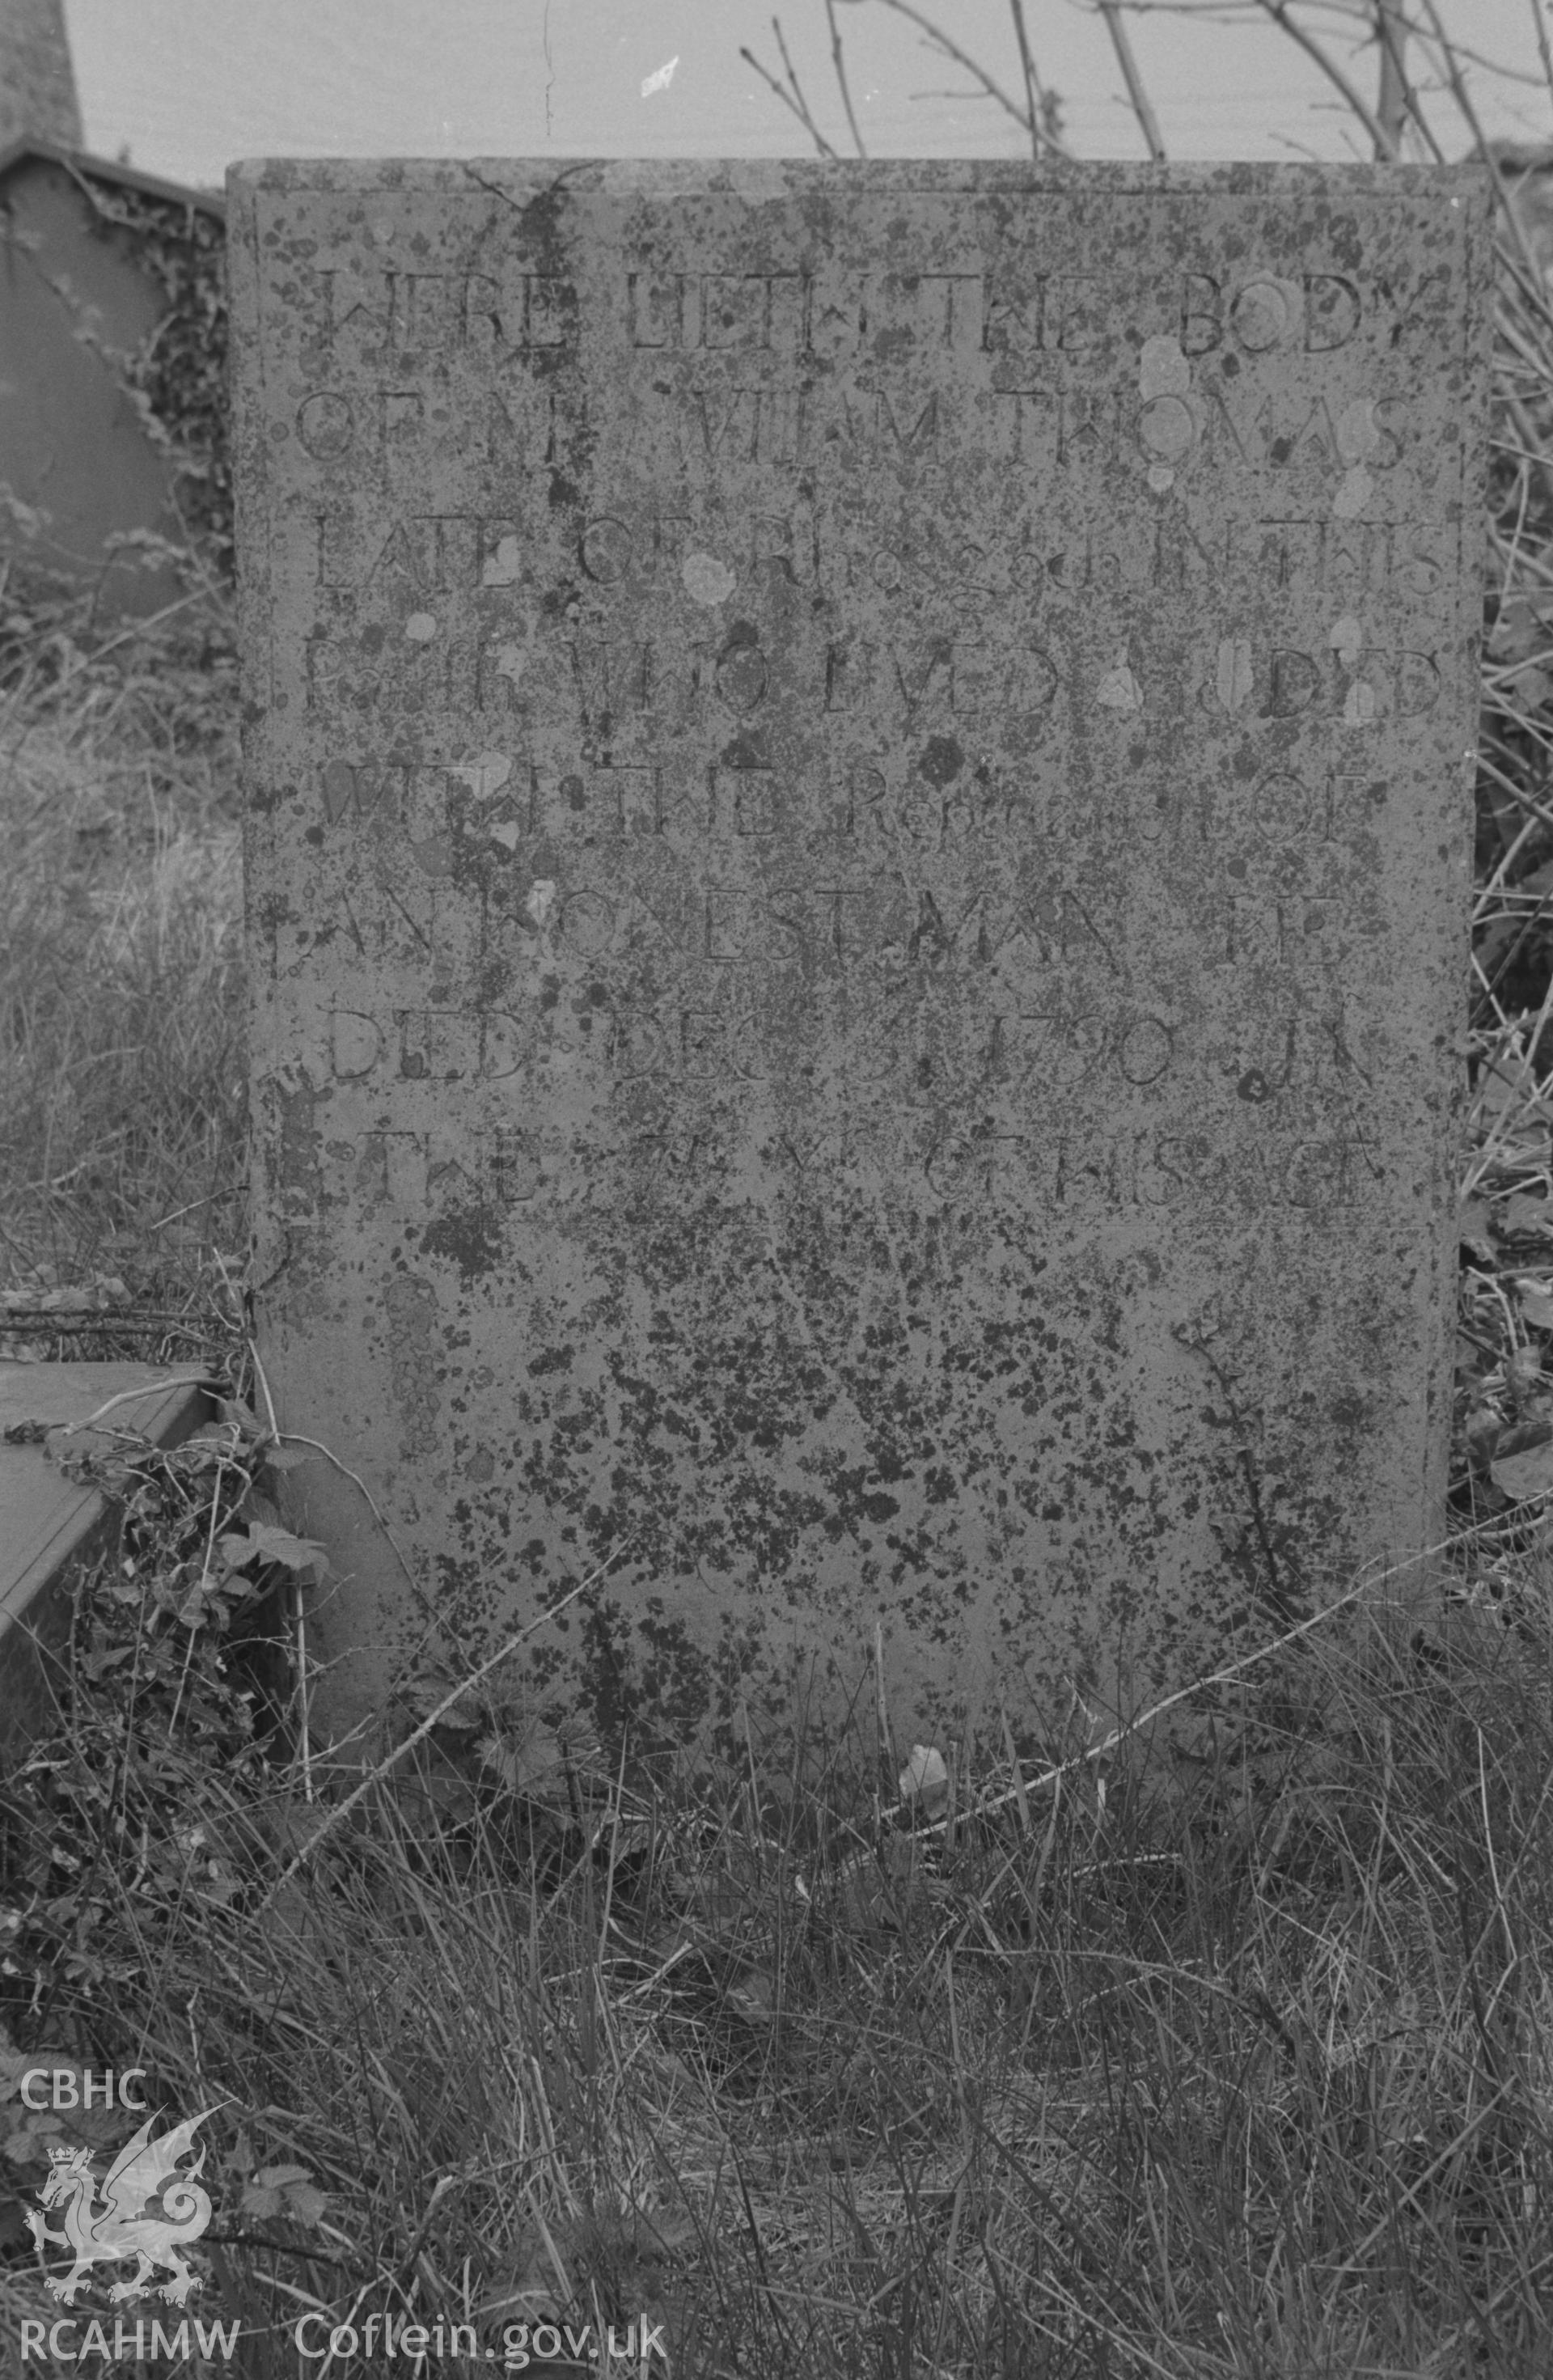 Digital copy of a black and white negative showing 1790s gravestone to the memory of William Thomas of Rhosgoda in churchyard to south of St. David's church, Llanarth. Photographed by Arthur O. Chater on 13th April 1967 from Grid Reference SN 423 578.